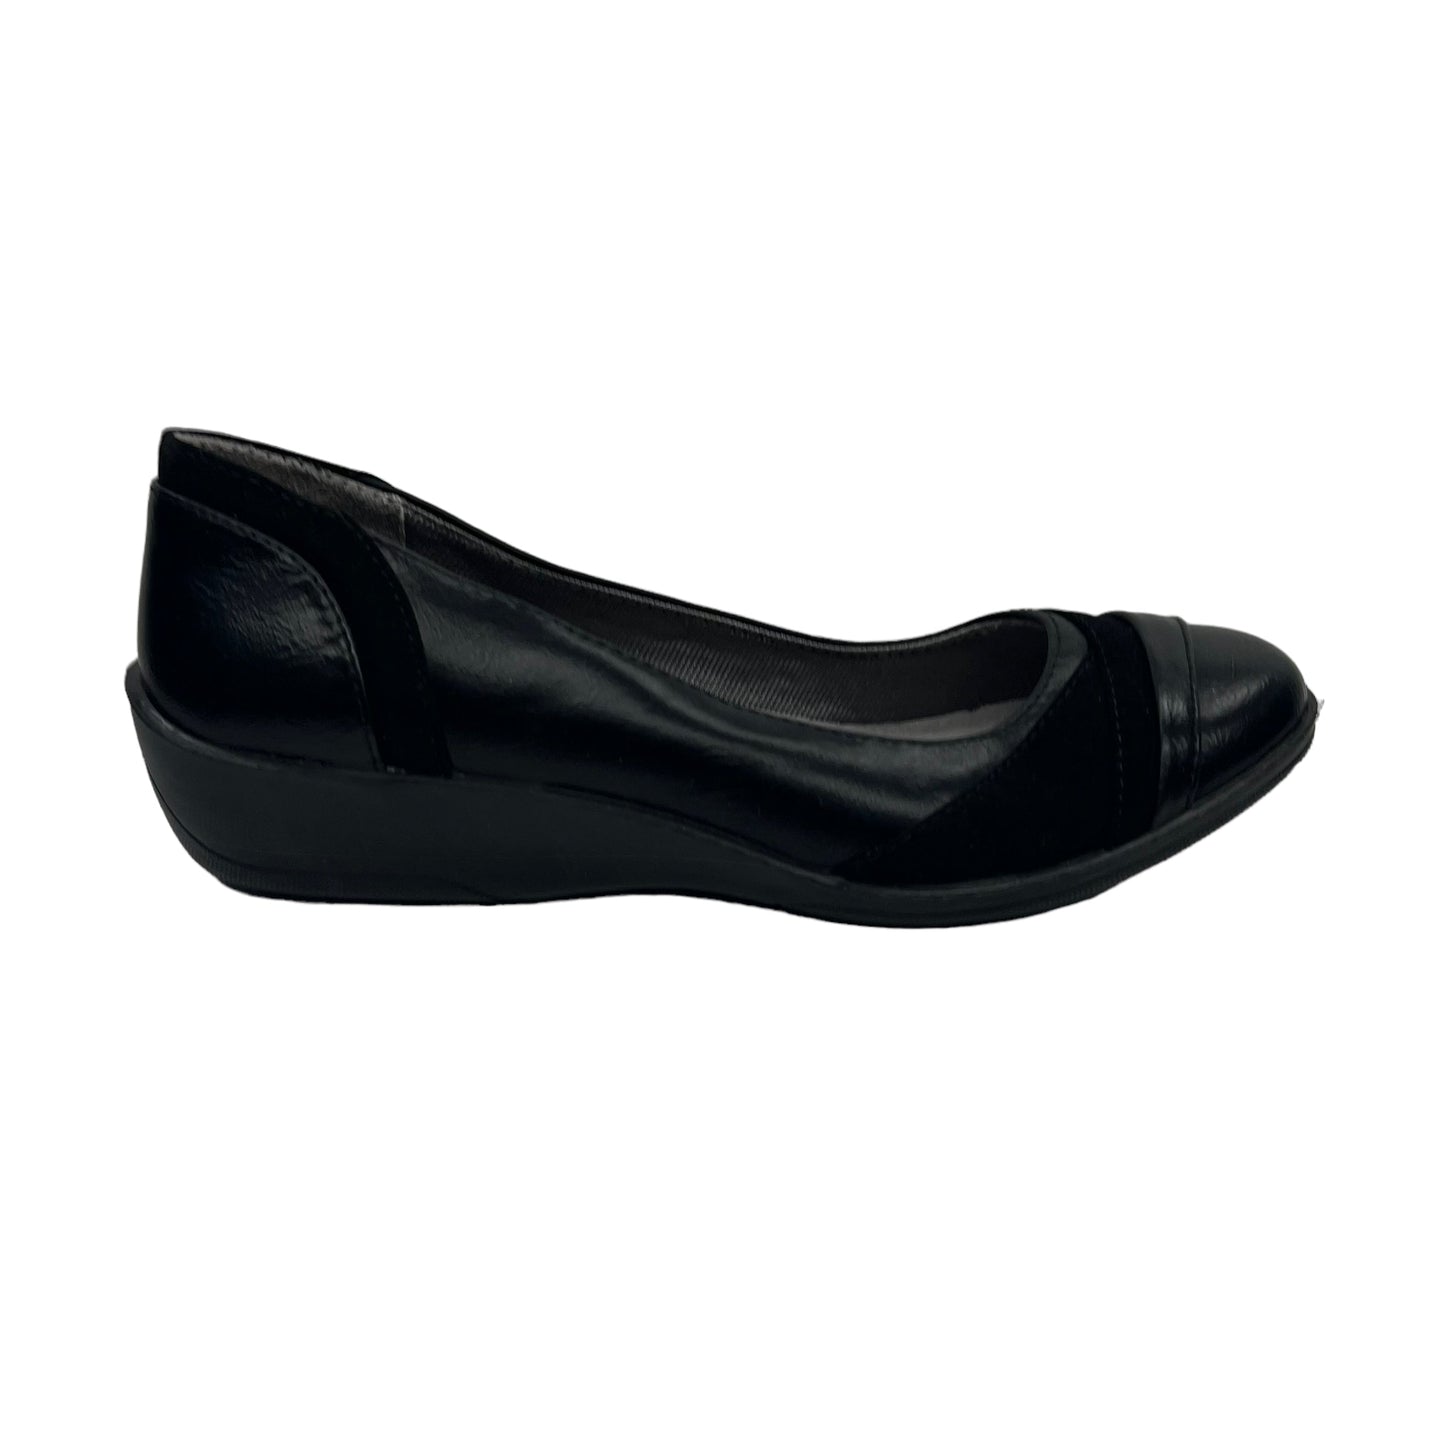 Shoes Flats Ballet By Life Stride  Size: 6.5